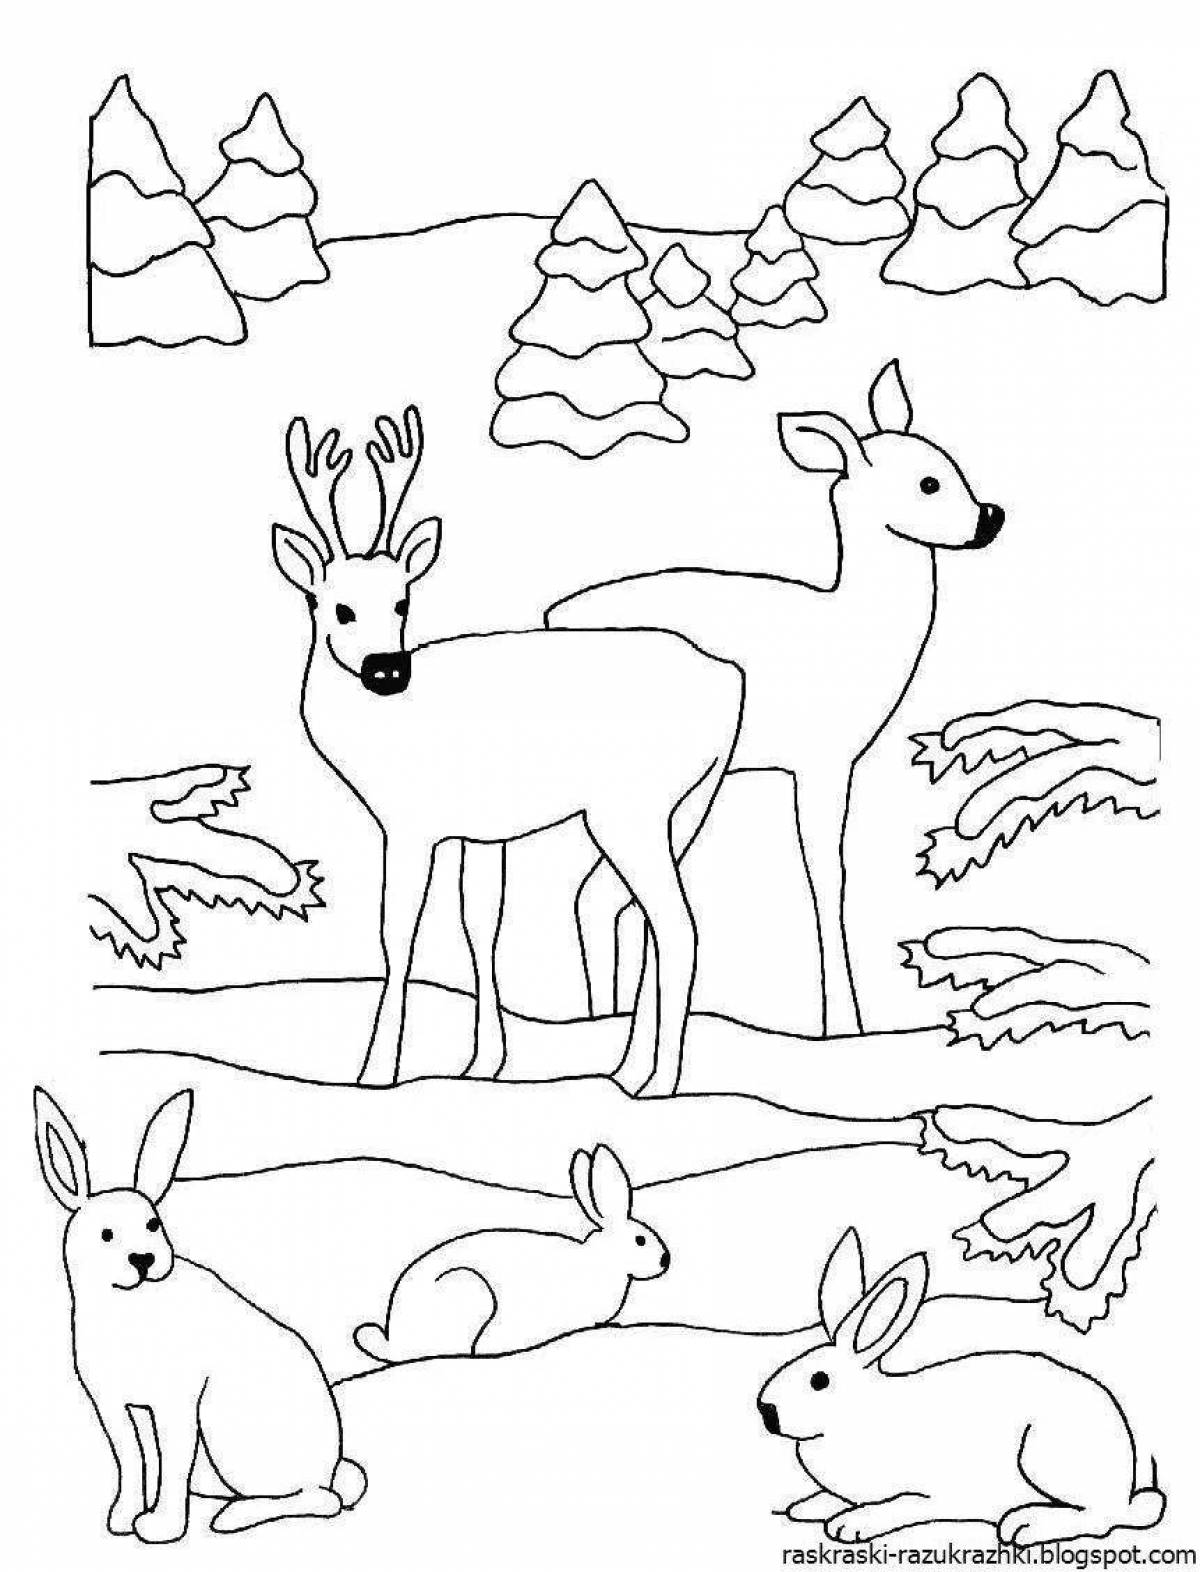 Fun coloring book of winter animals for kids